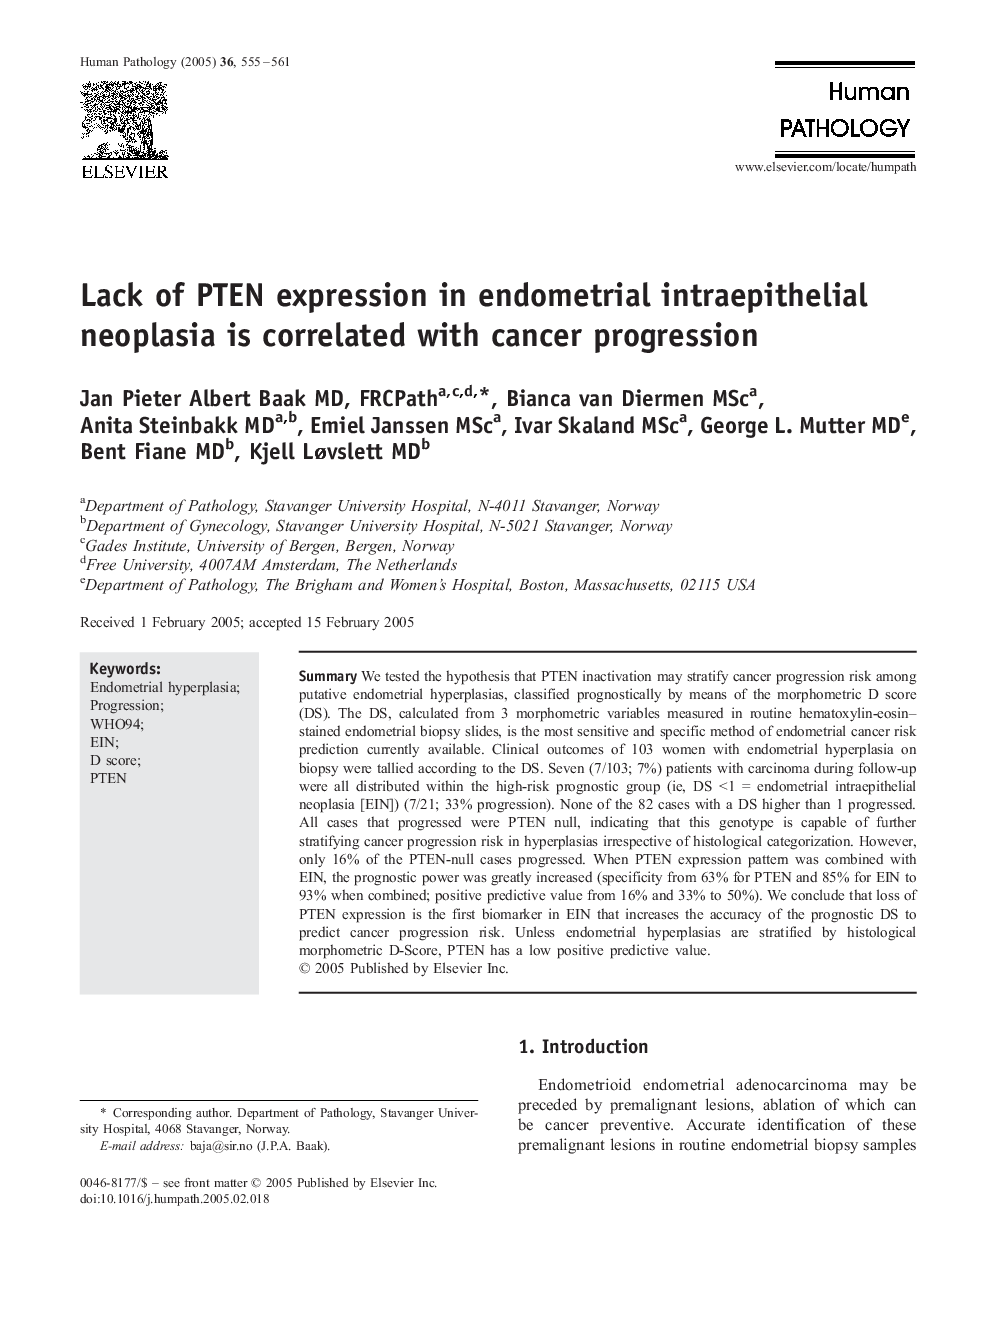 Lack of PTEN expression in endometrial intraepithelial neoplasia is correlated with cancer progression